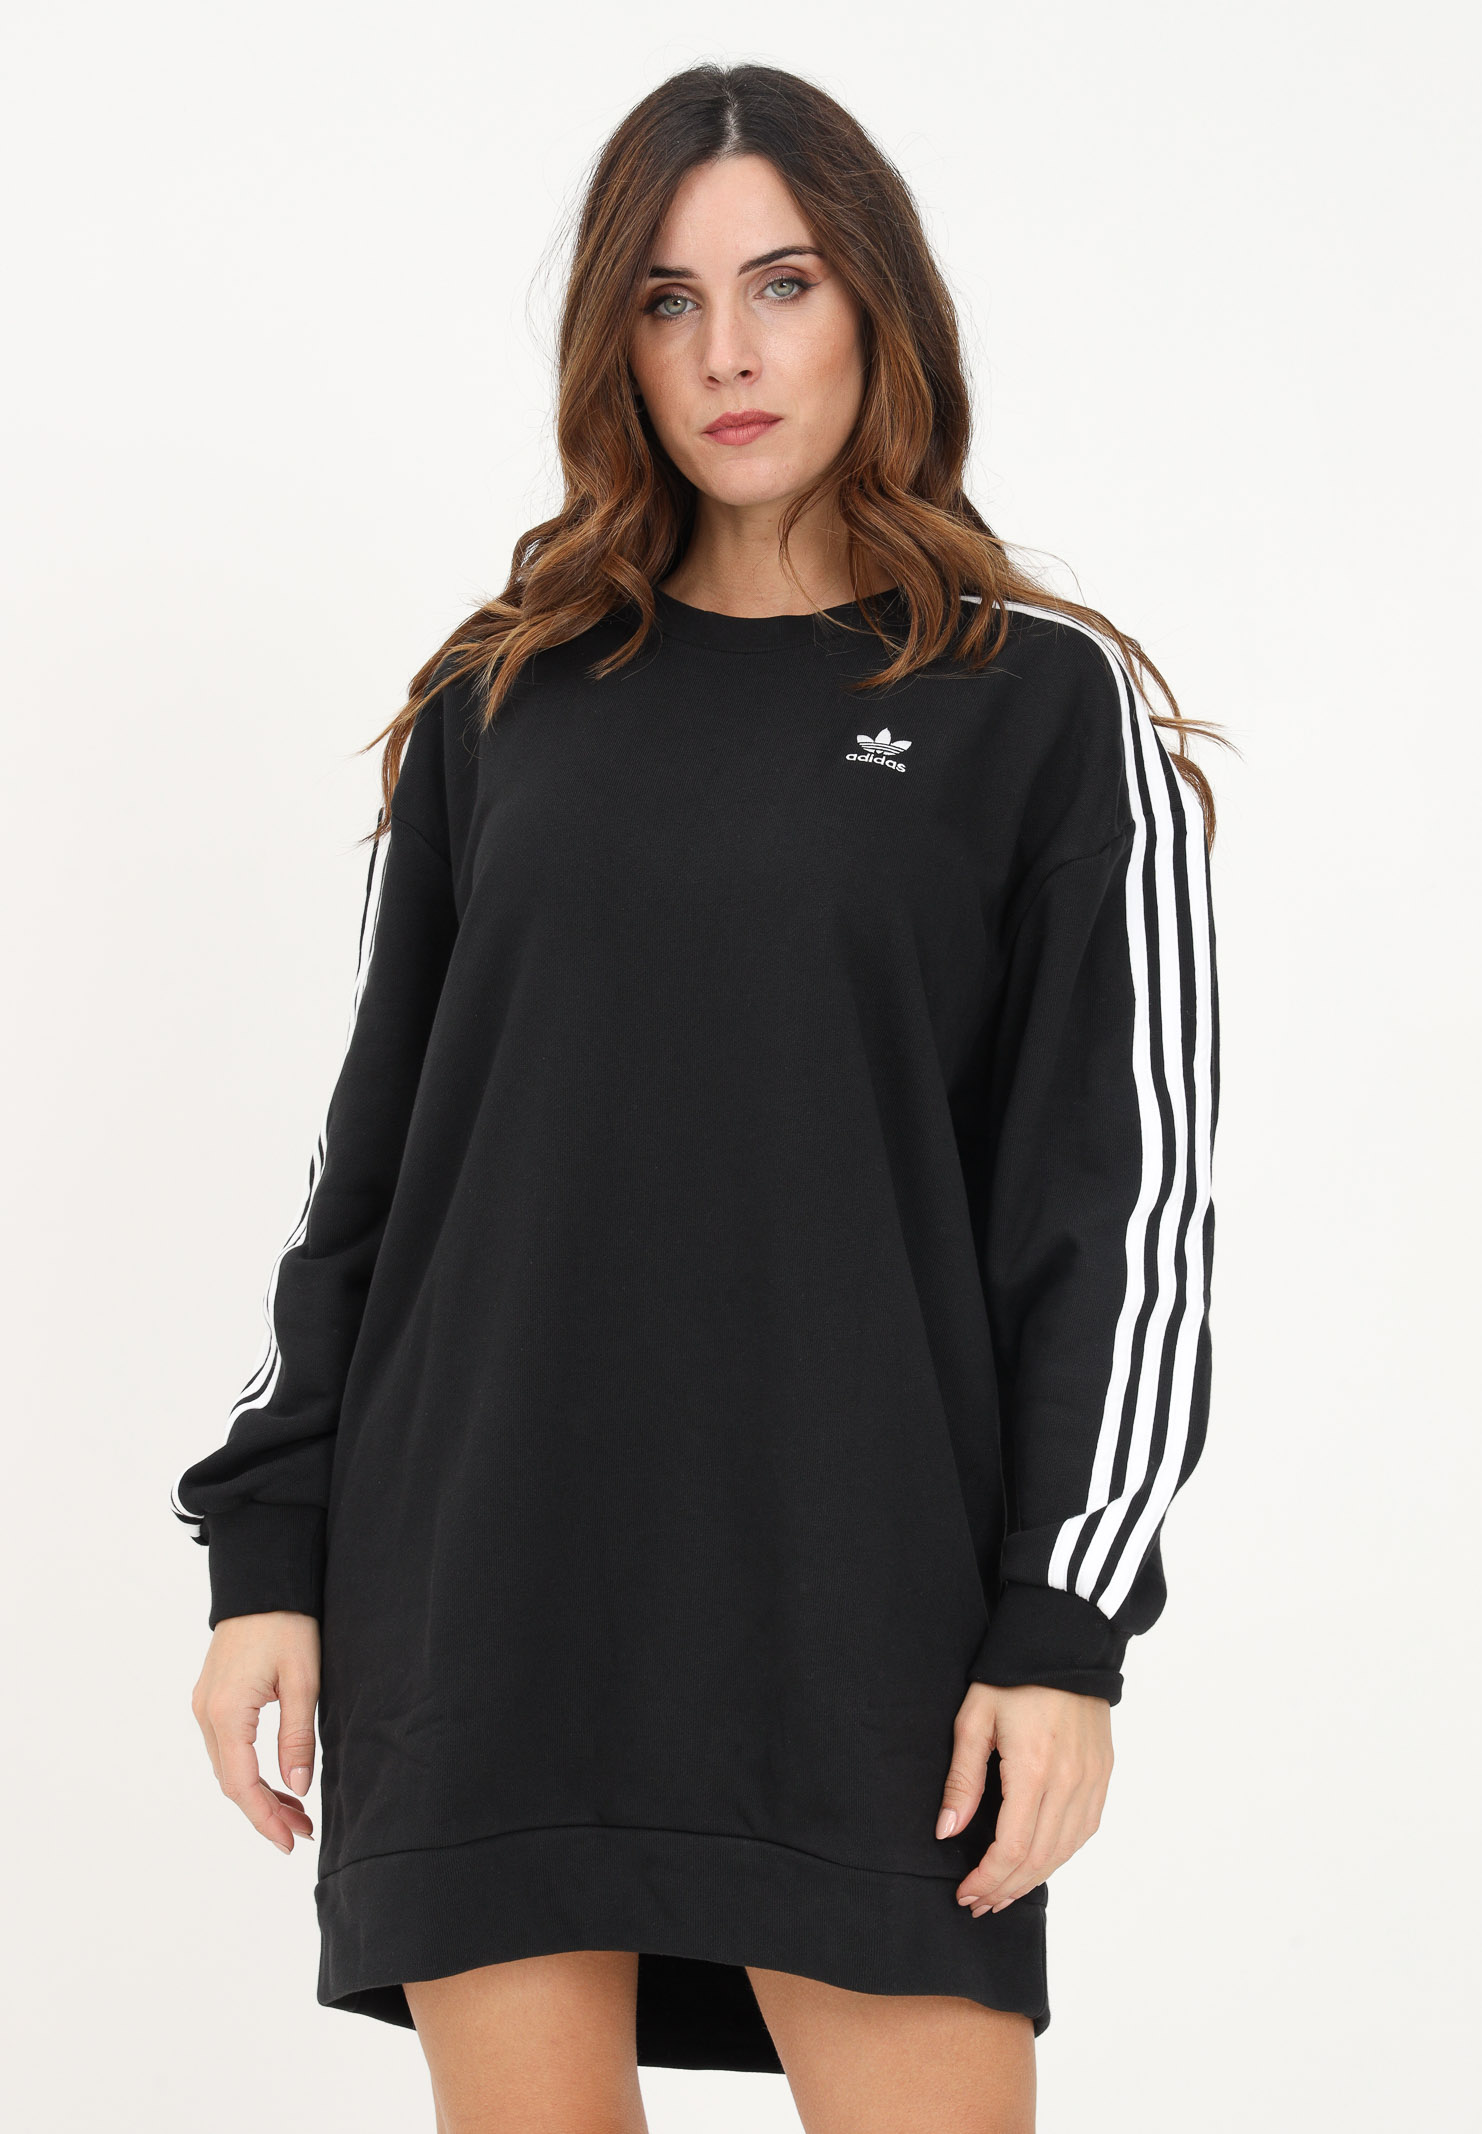 Black short dress for women with logo and 3 stripes ADIDAS | HM4688.